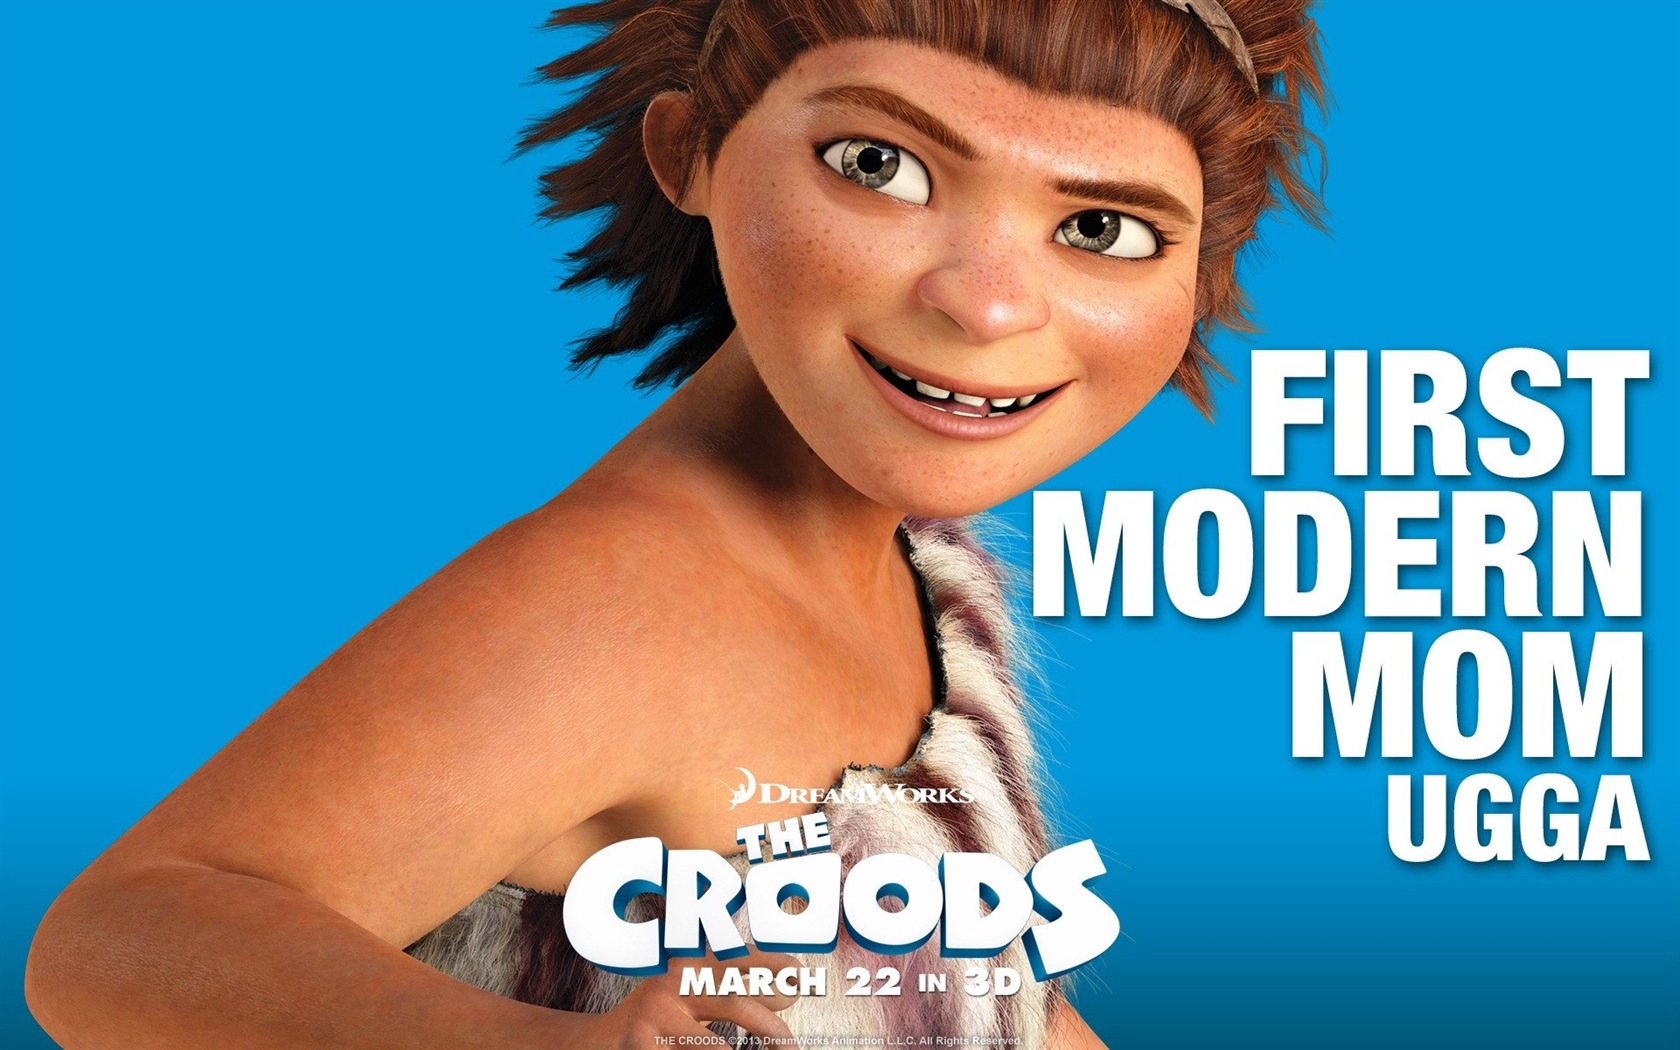 The Croods HD movie wallpapers #7 - 1680x1050